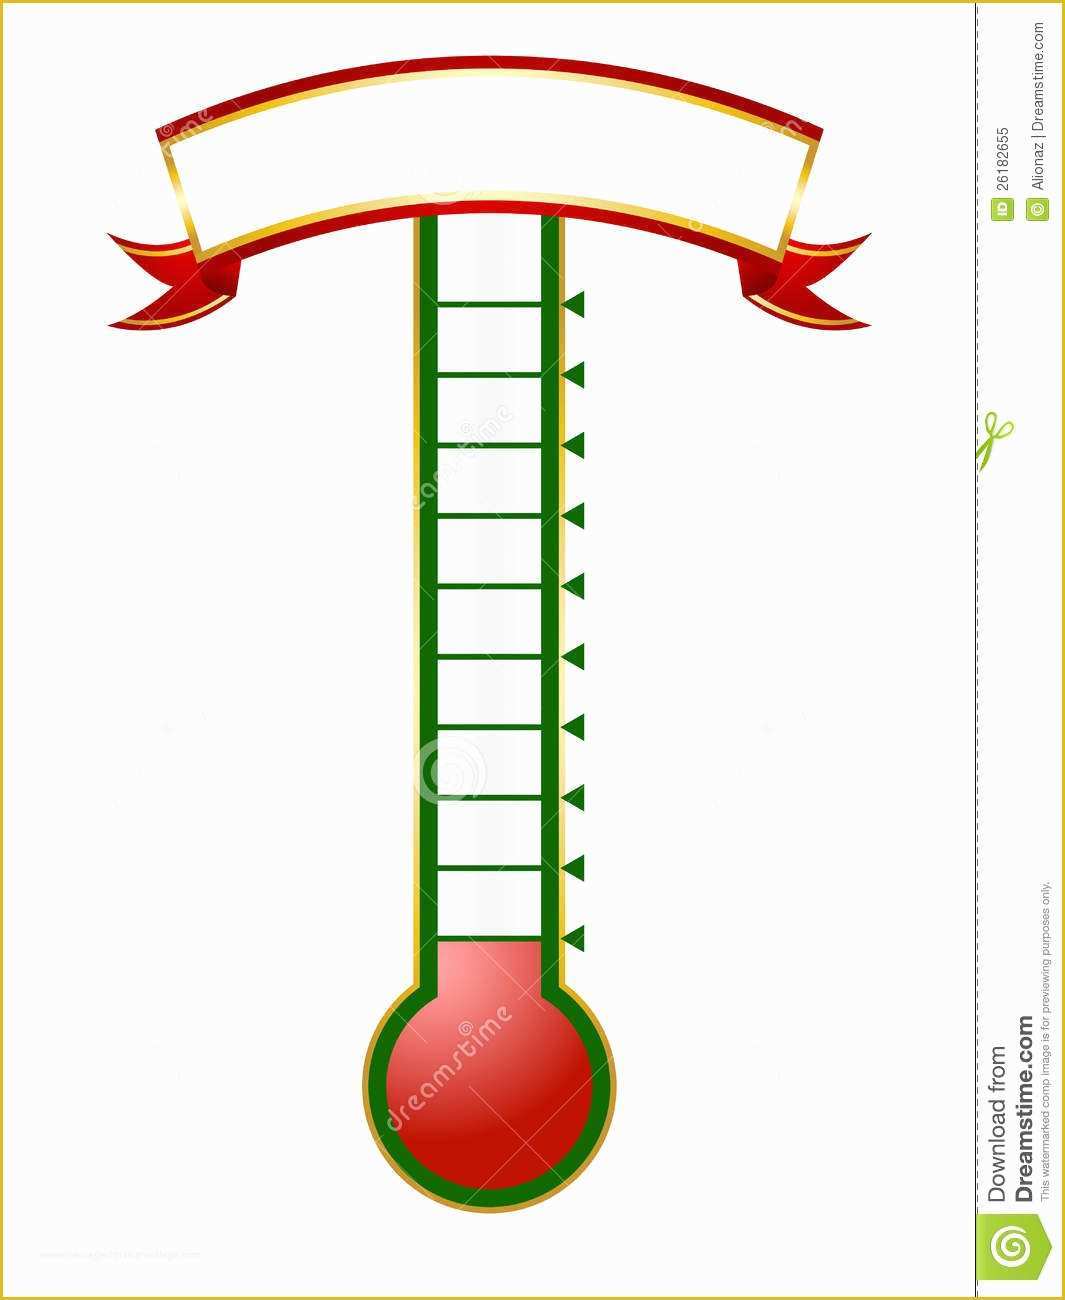 Free Printable Goal thermometer Template Of Goal thermometer Stock Vector Illustration Of Goal Empty